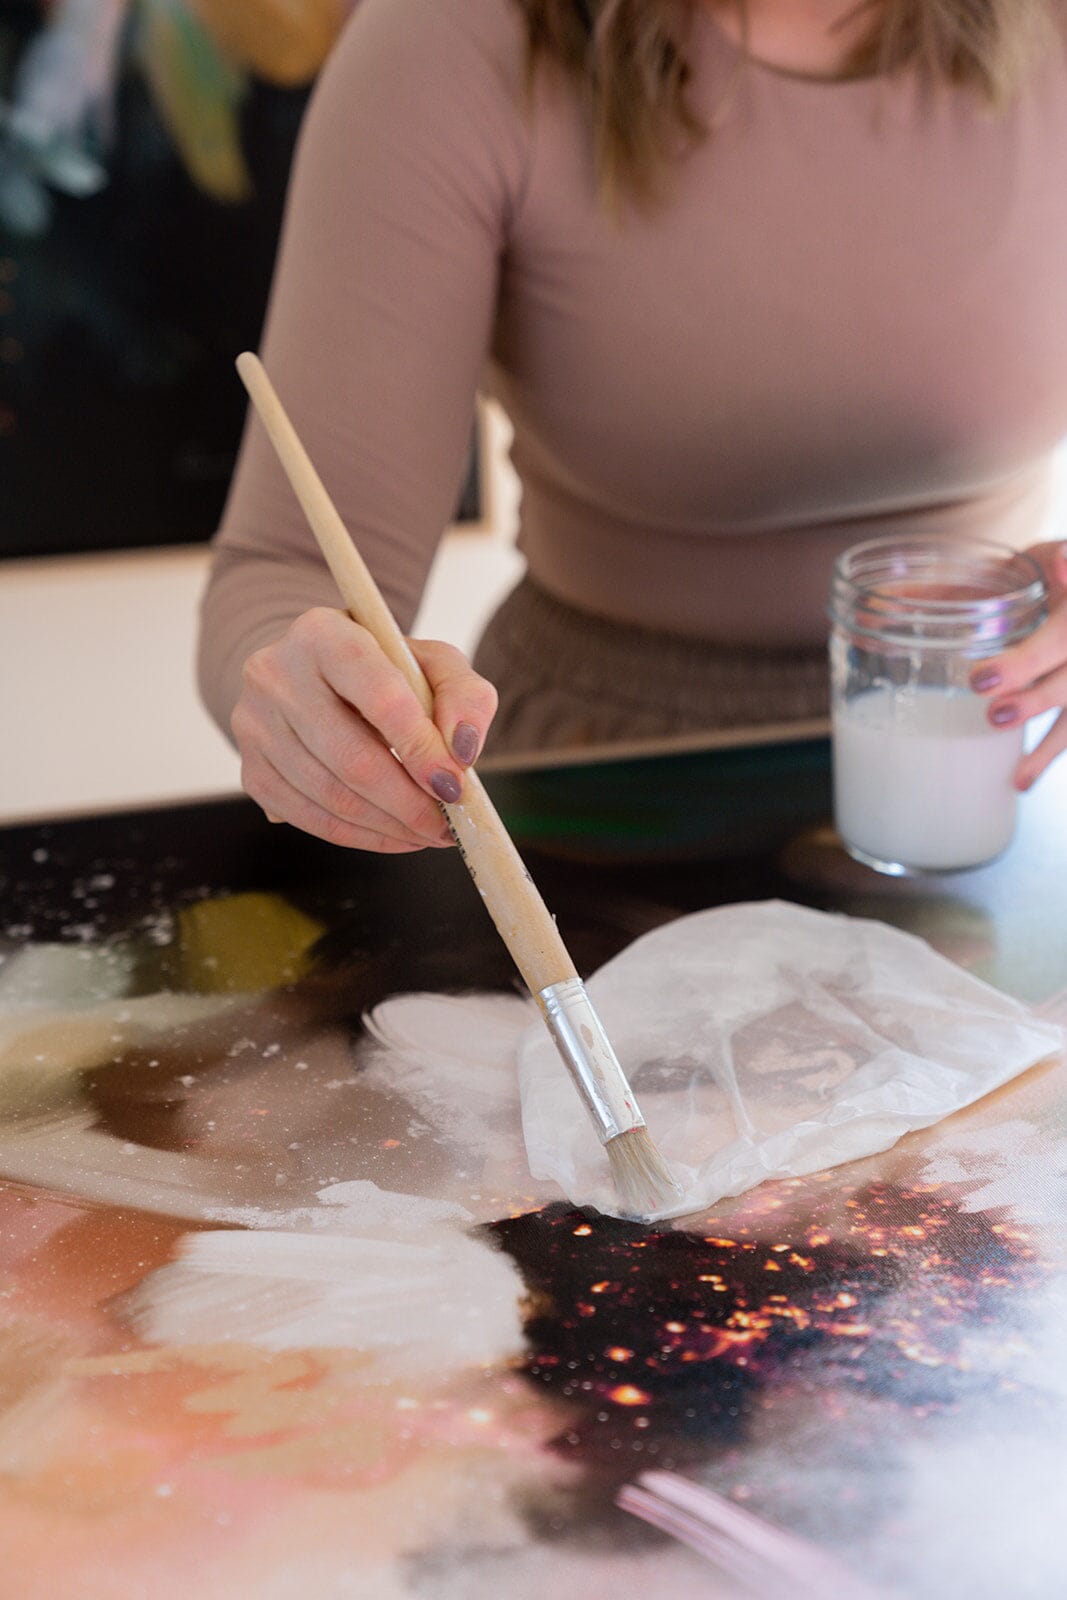 Podcast #1 - How to Ignite more Creativity in your Art Practice